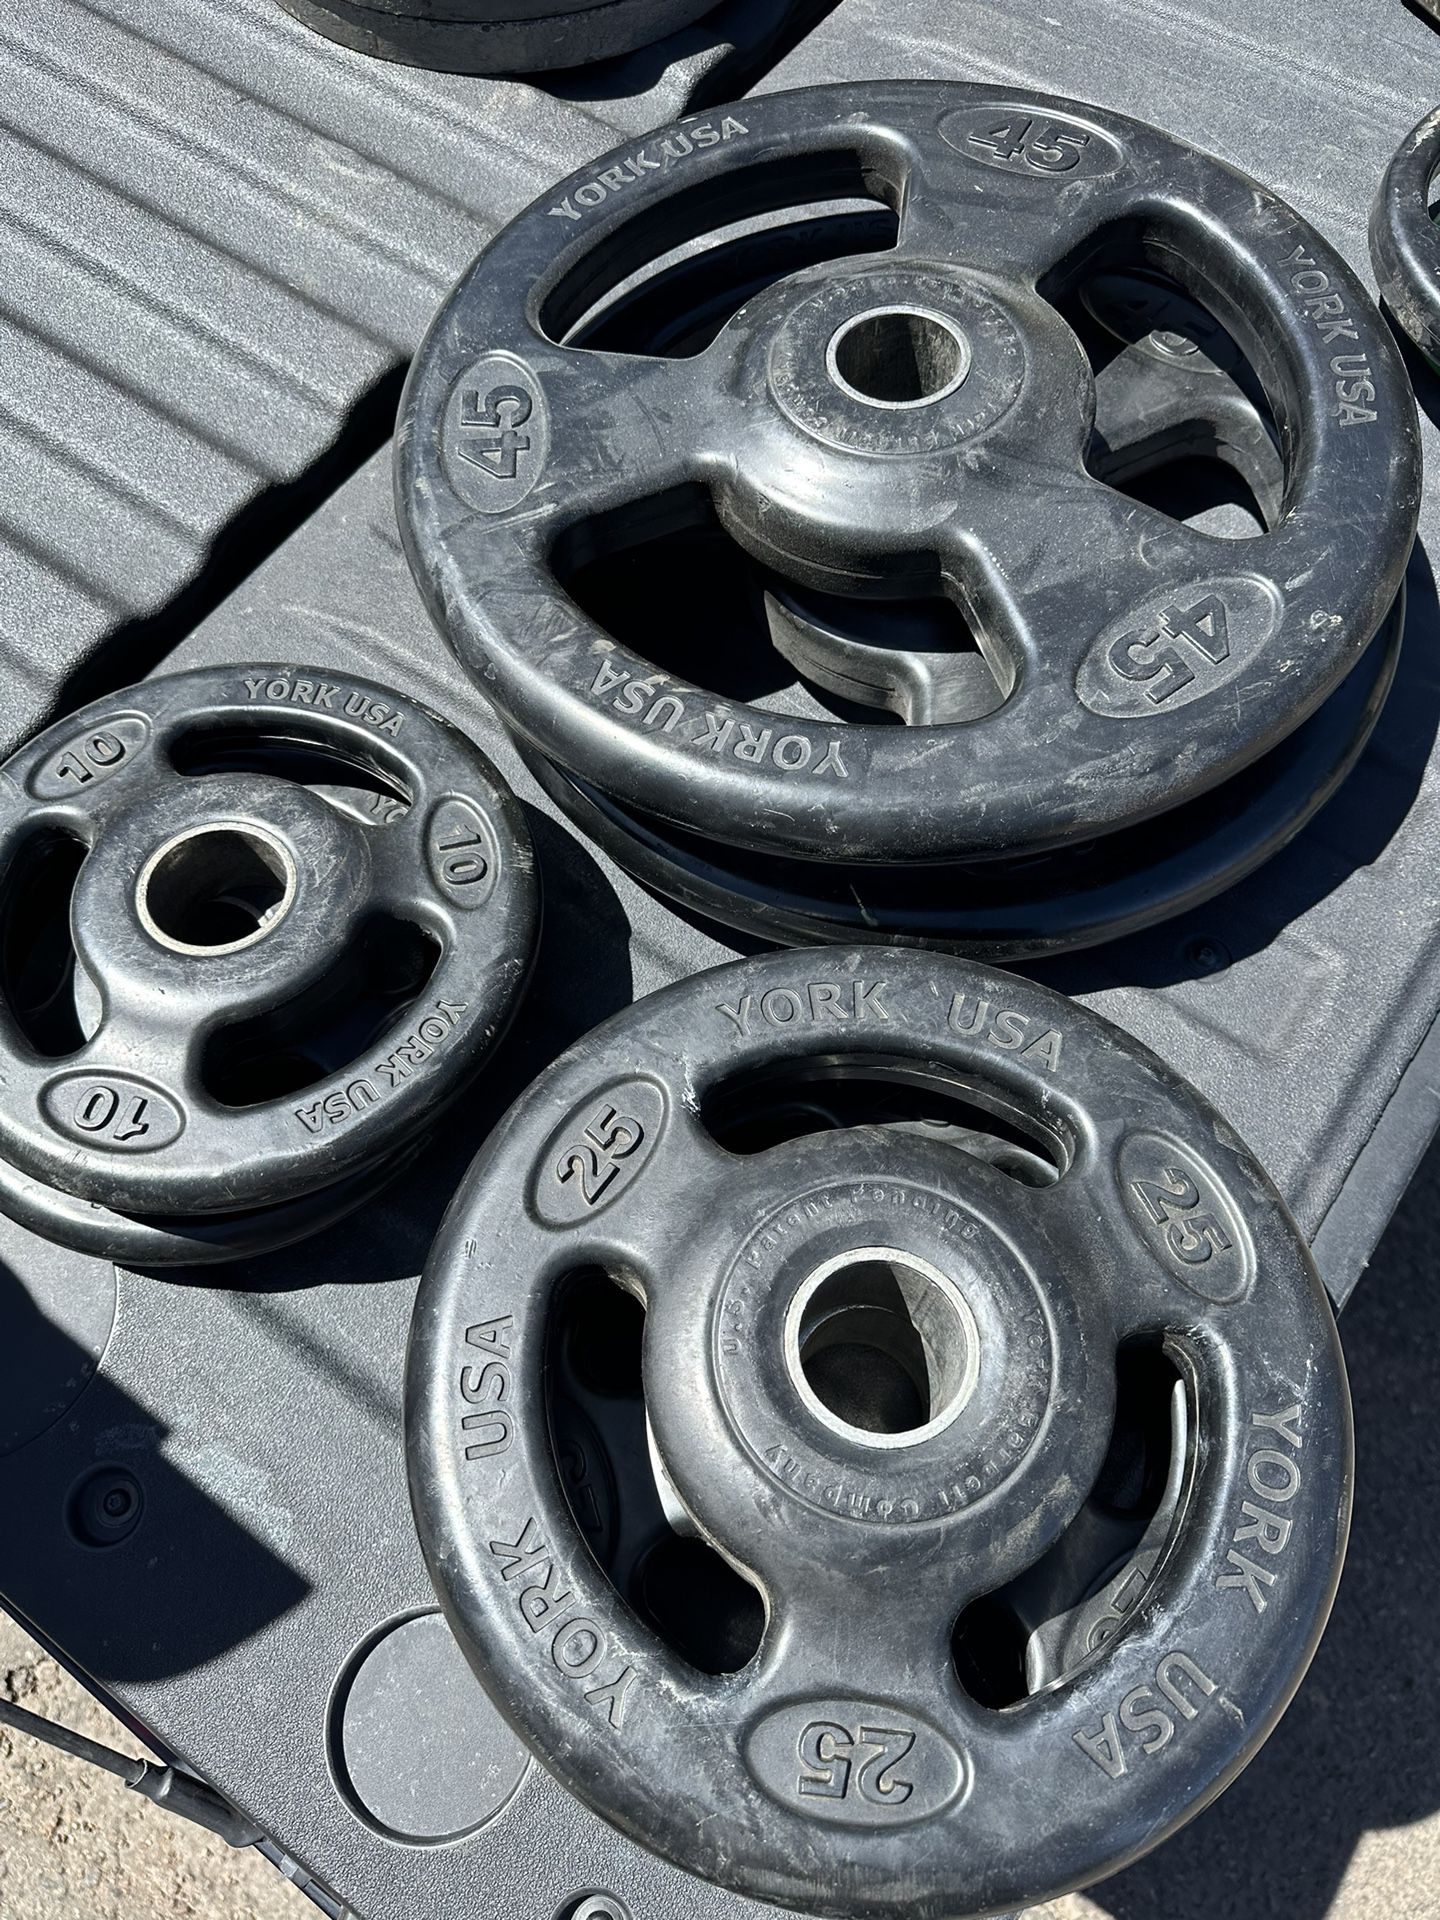 160lb rubber coated Olympic weight set-York